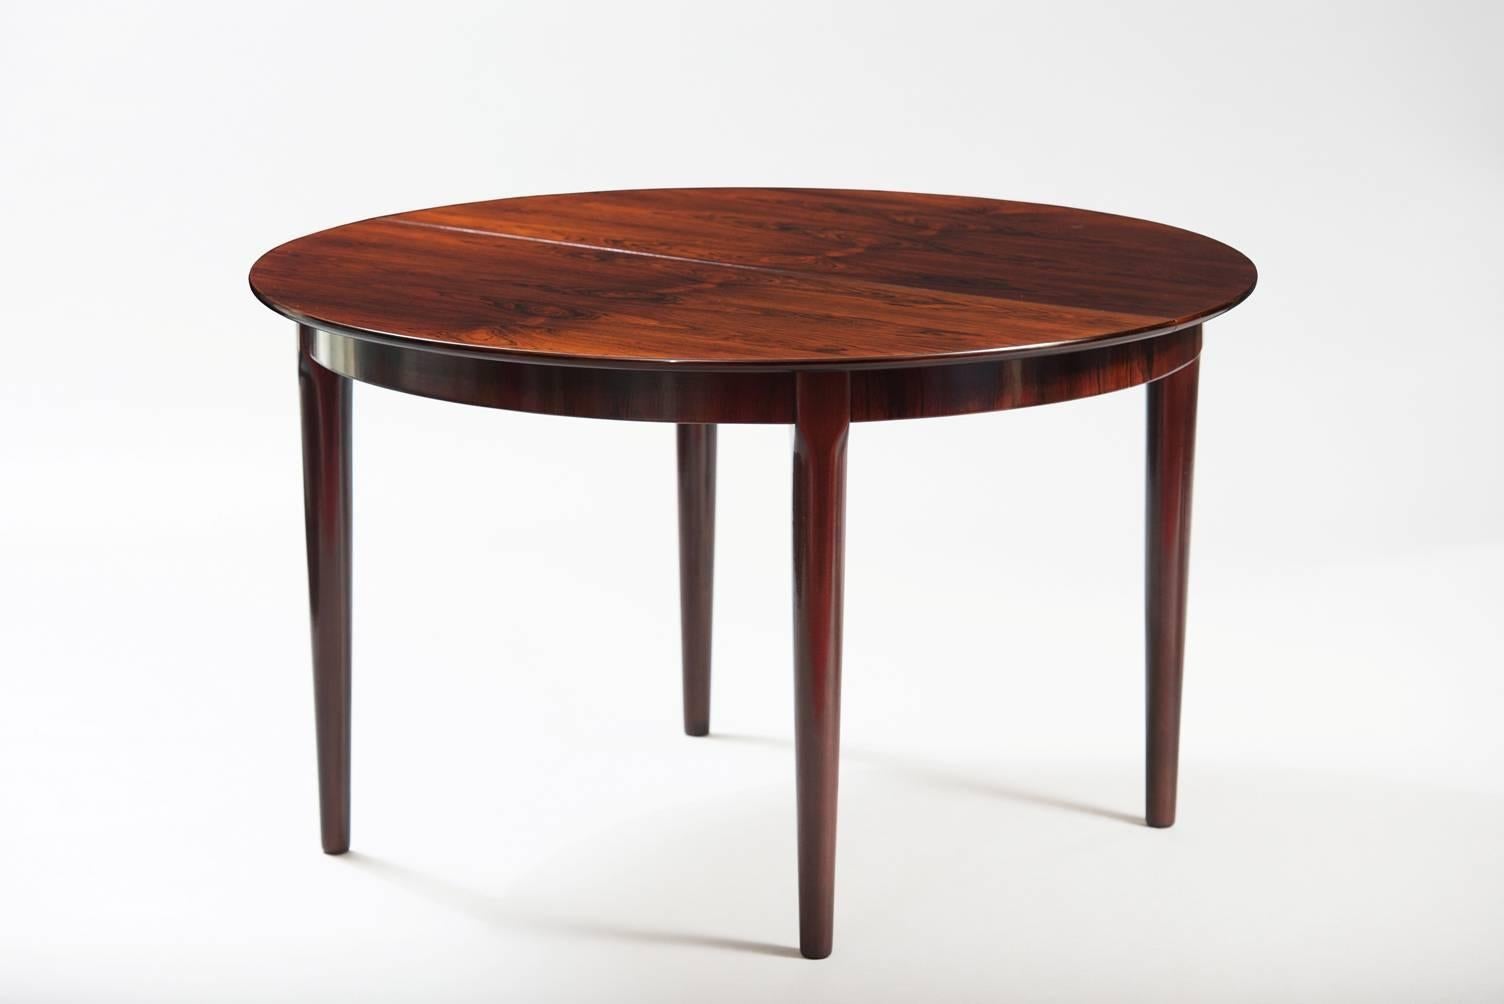 Rosewood extendible round dining table.
Measures: W. 325 125 cm (closed), D. 125 cm, H. 74 cm.